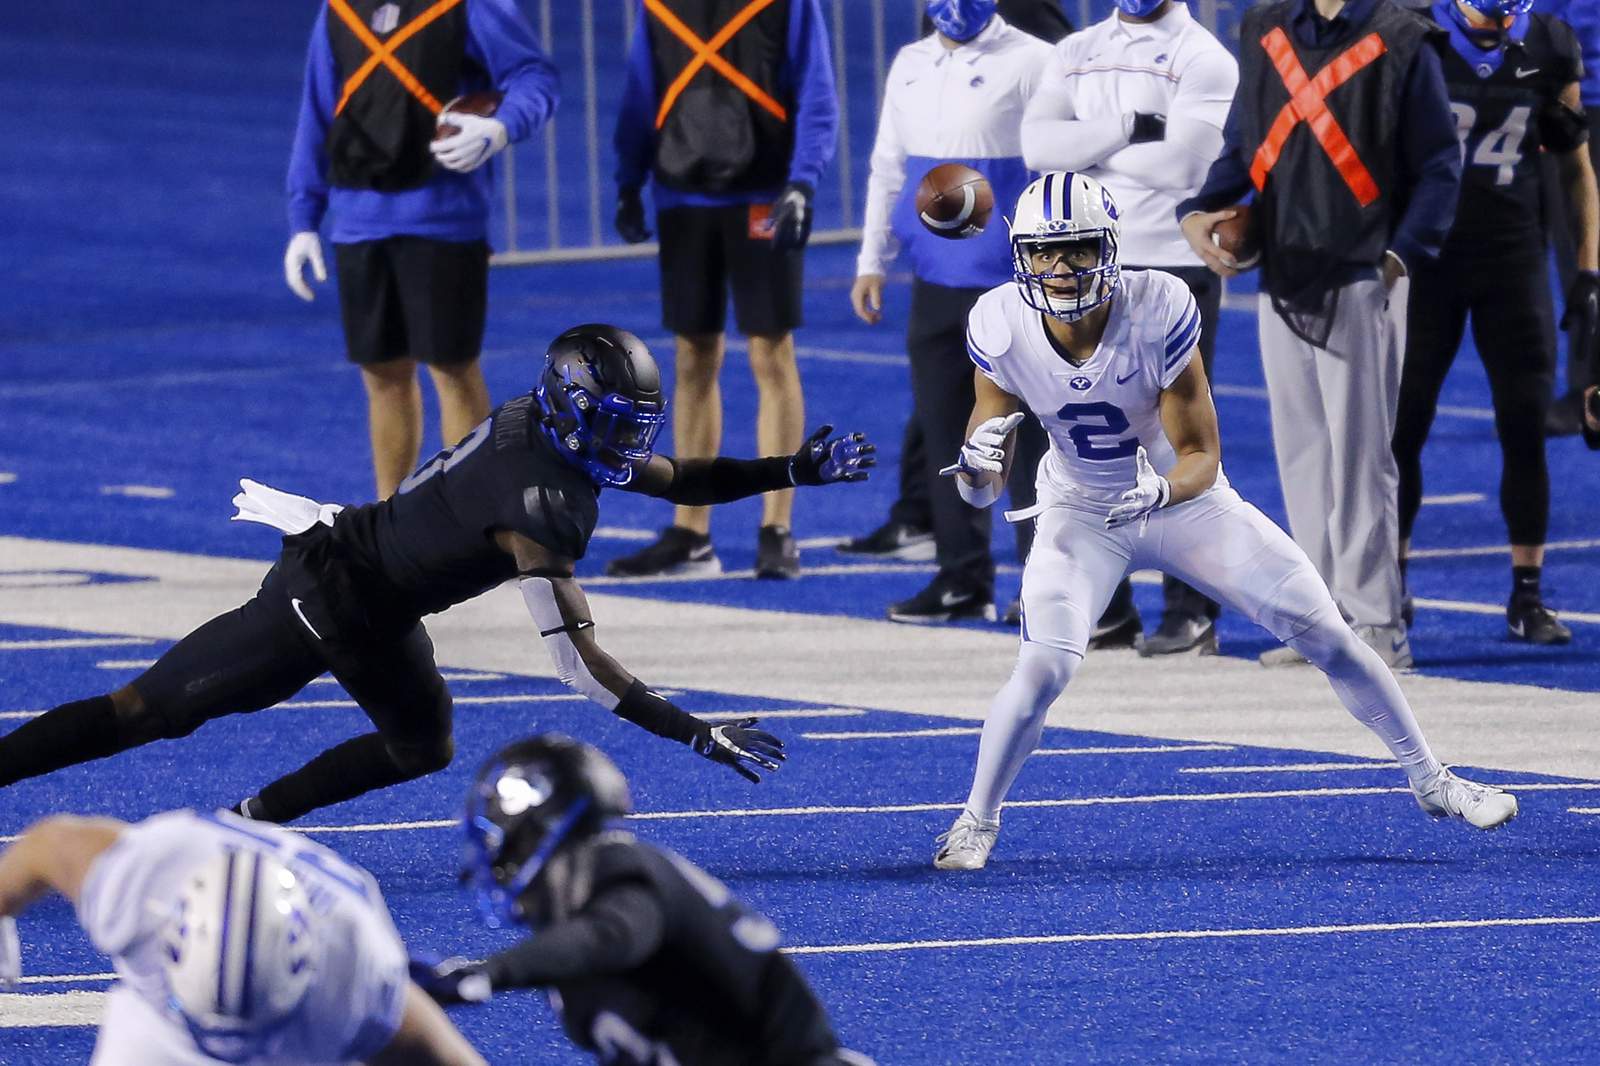 No. 9 BYU routs No. 21 Boise State 51-17 to remain unbeaten